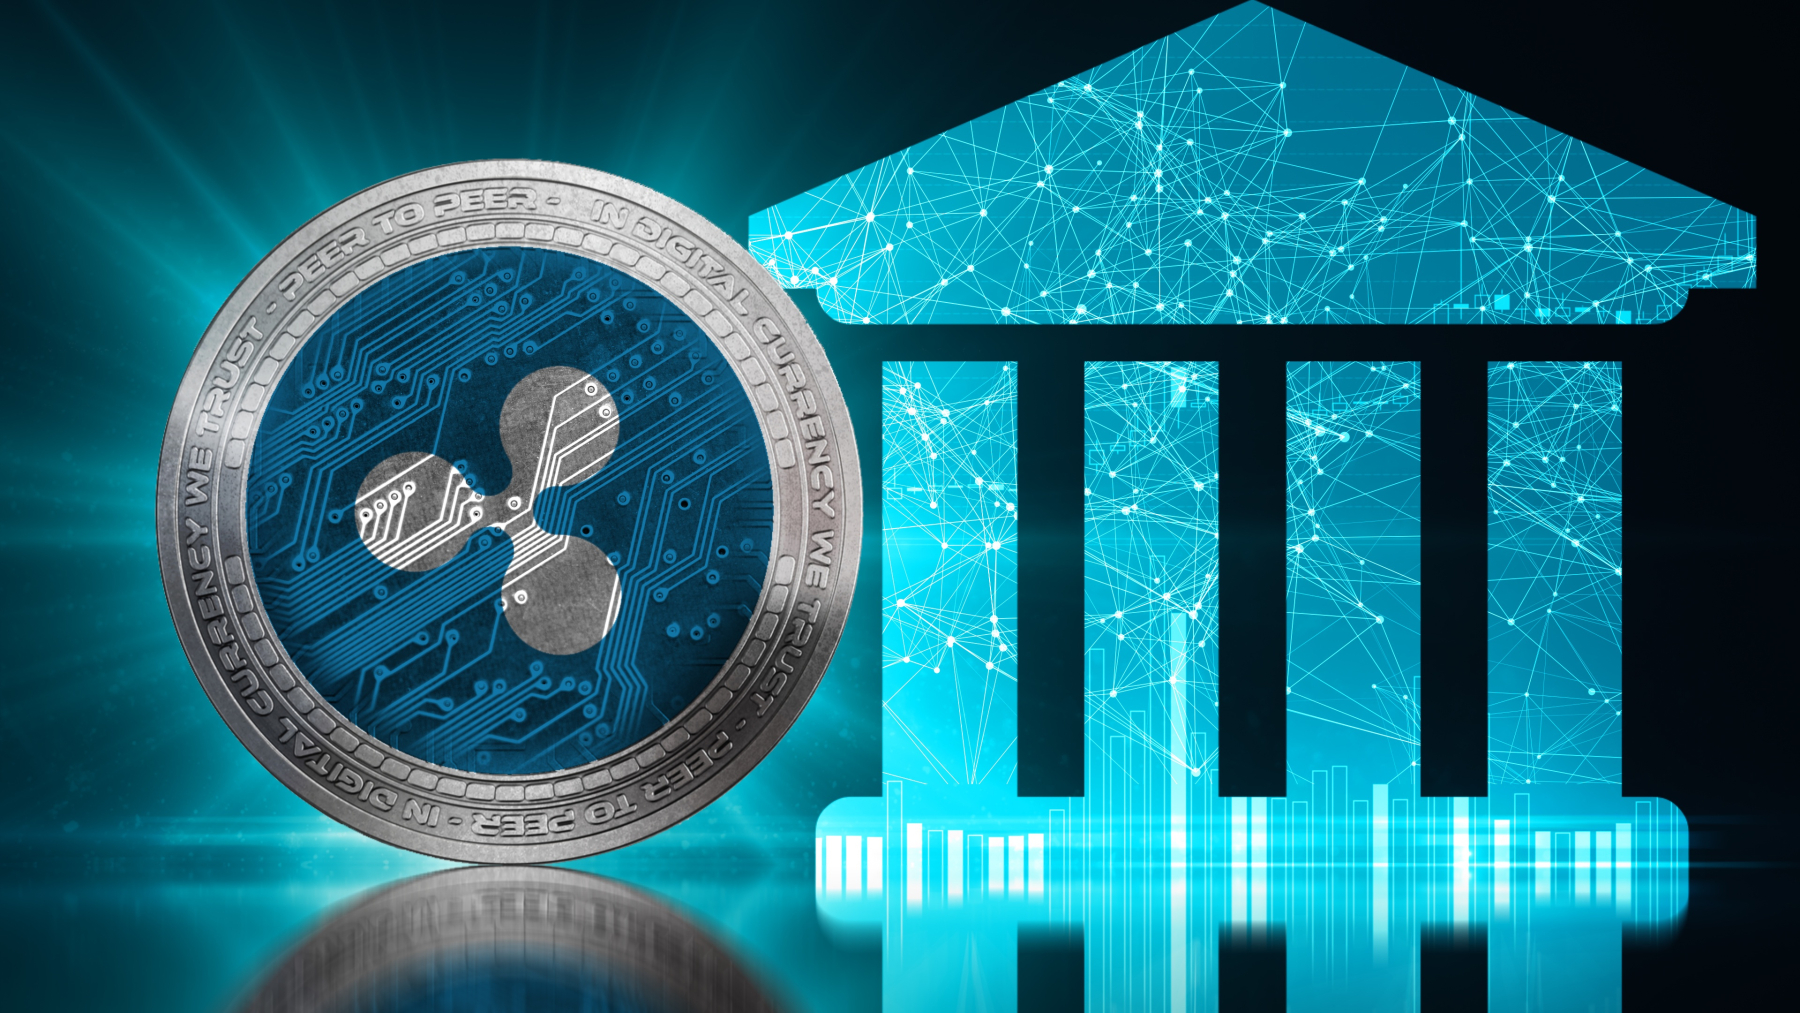 Ripple in talks with over 20 central banks about CBDCs
